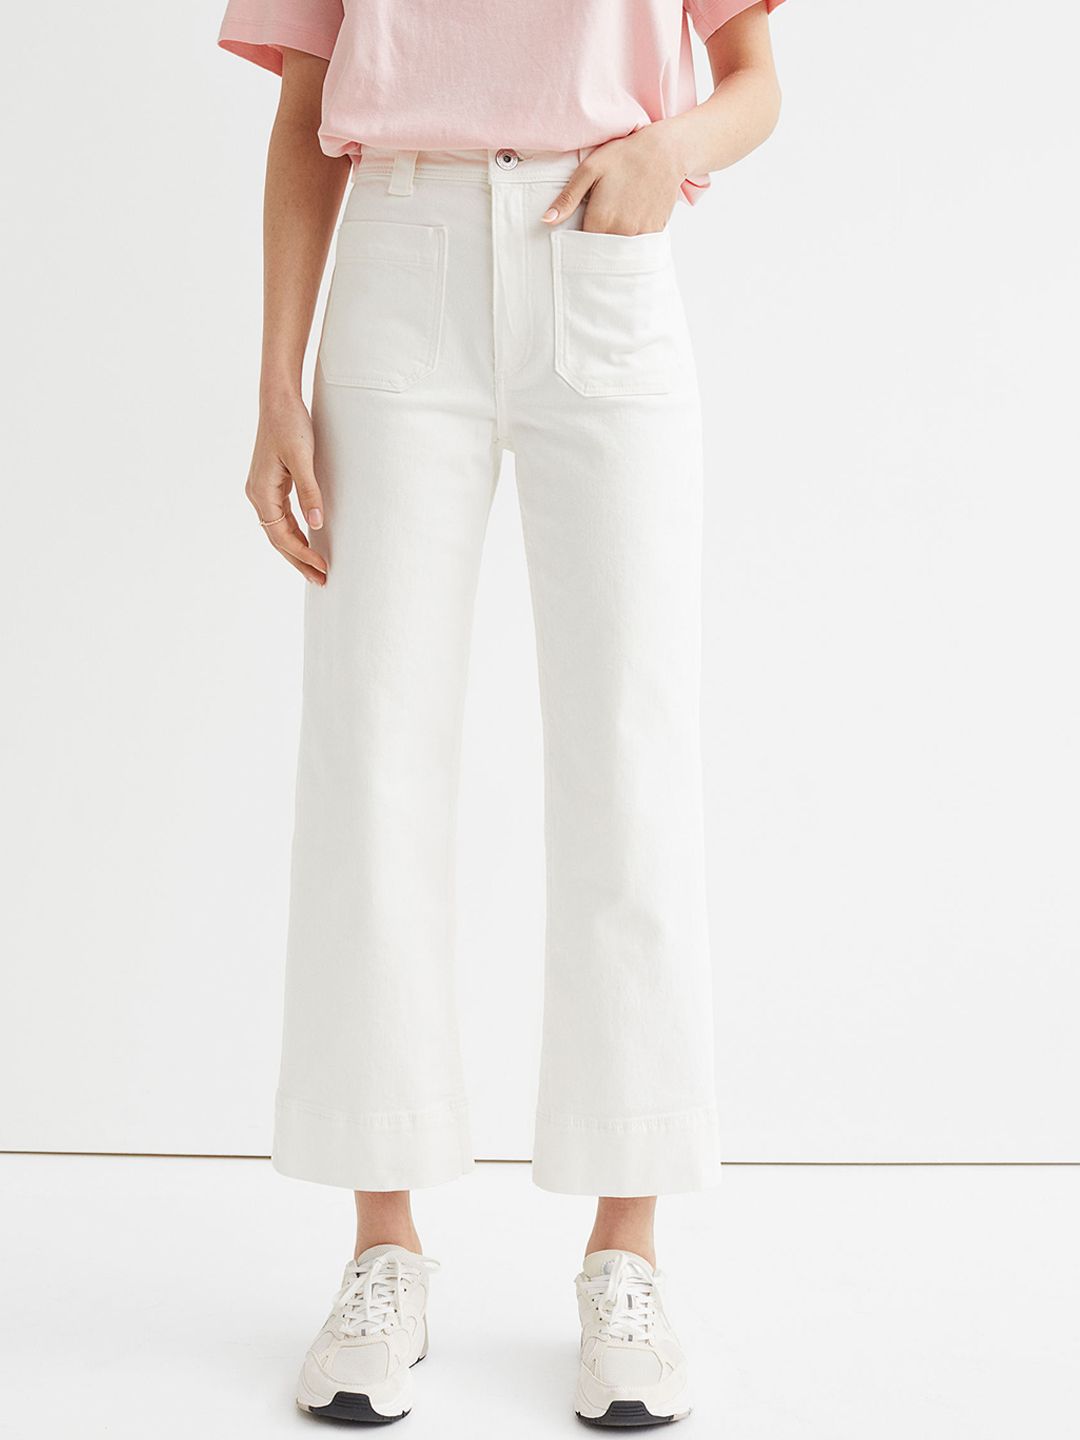 H&M Women White Slim Fit High-Rise Jeans Price in India